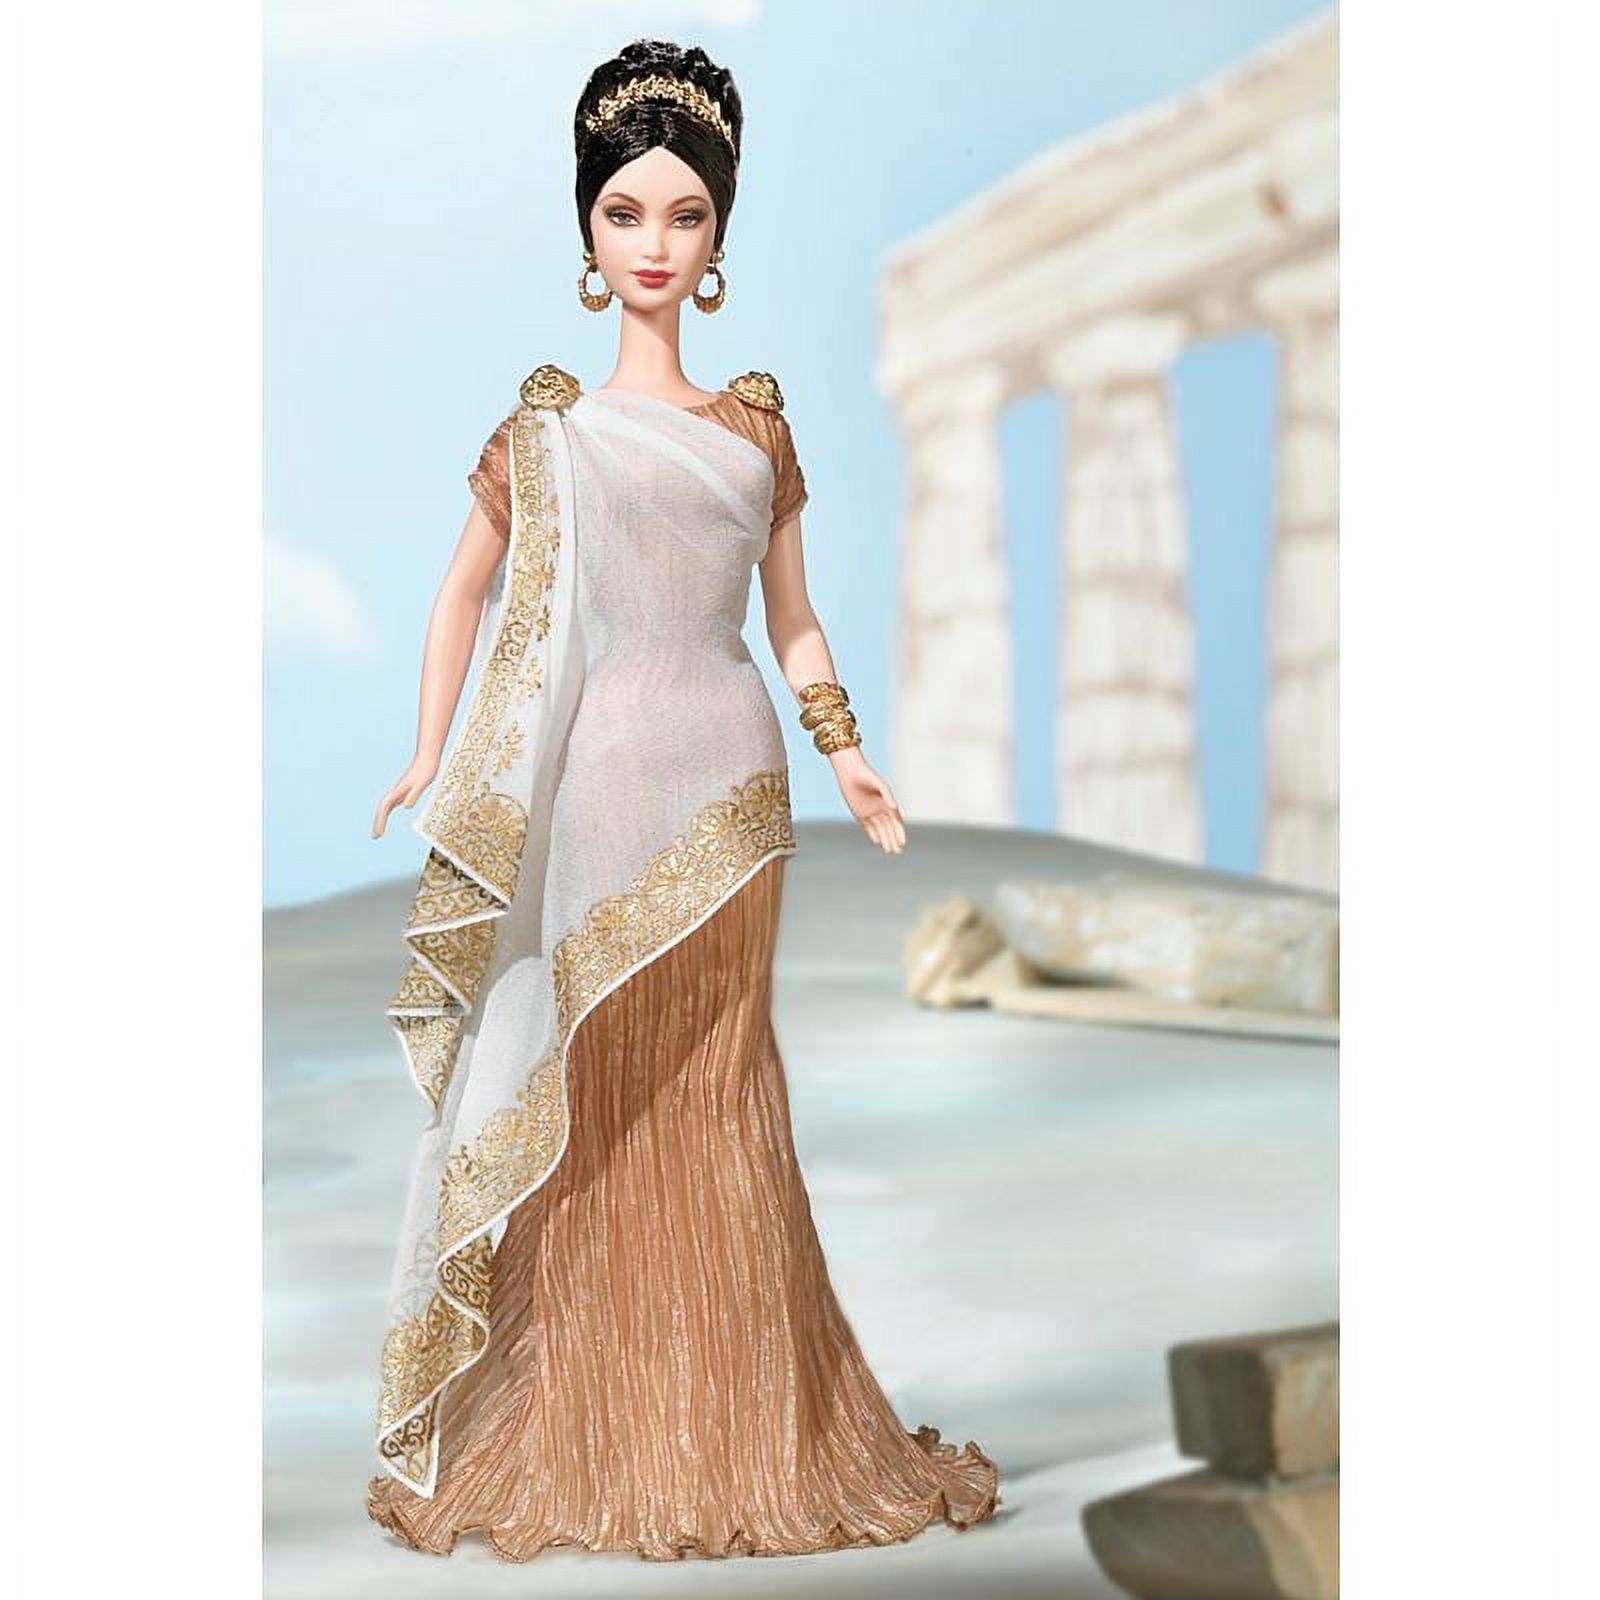 Barbie Dolls of the World: Princess of Greece - image 1 of 2